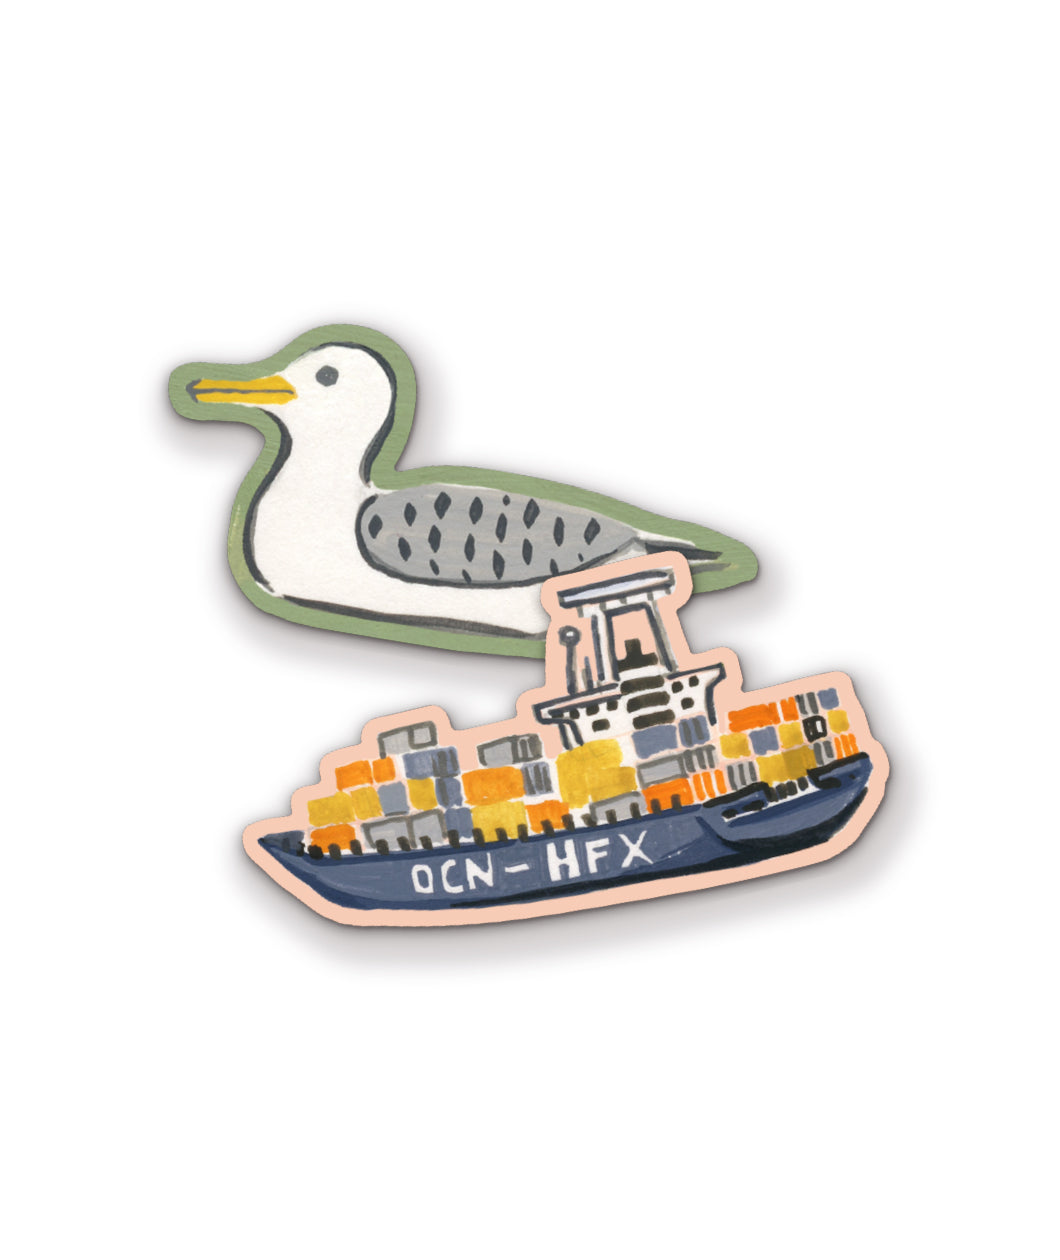 A set of 2 stickers. The first is of a painted seagull and the second is of a painted shipping boat.